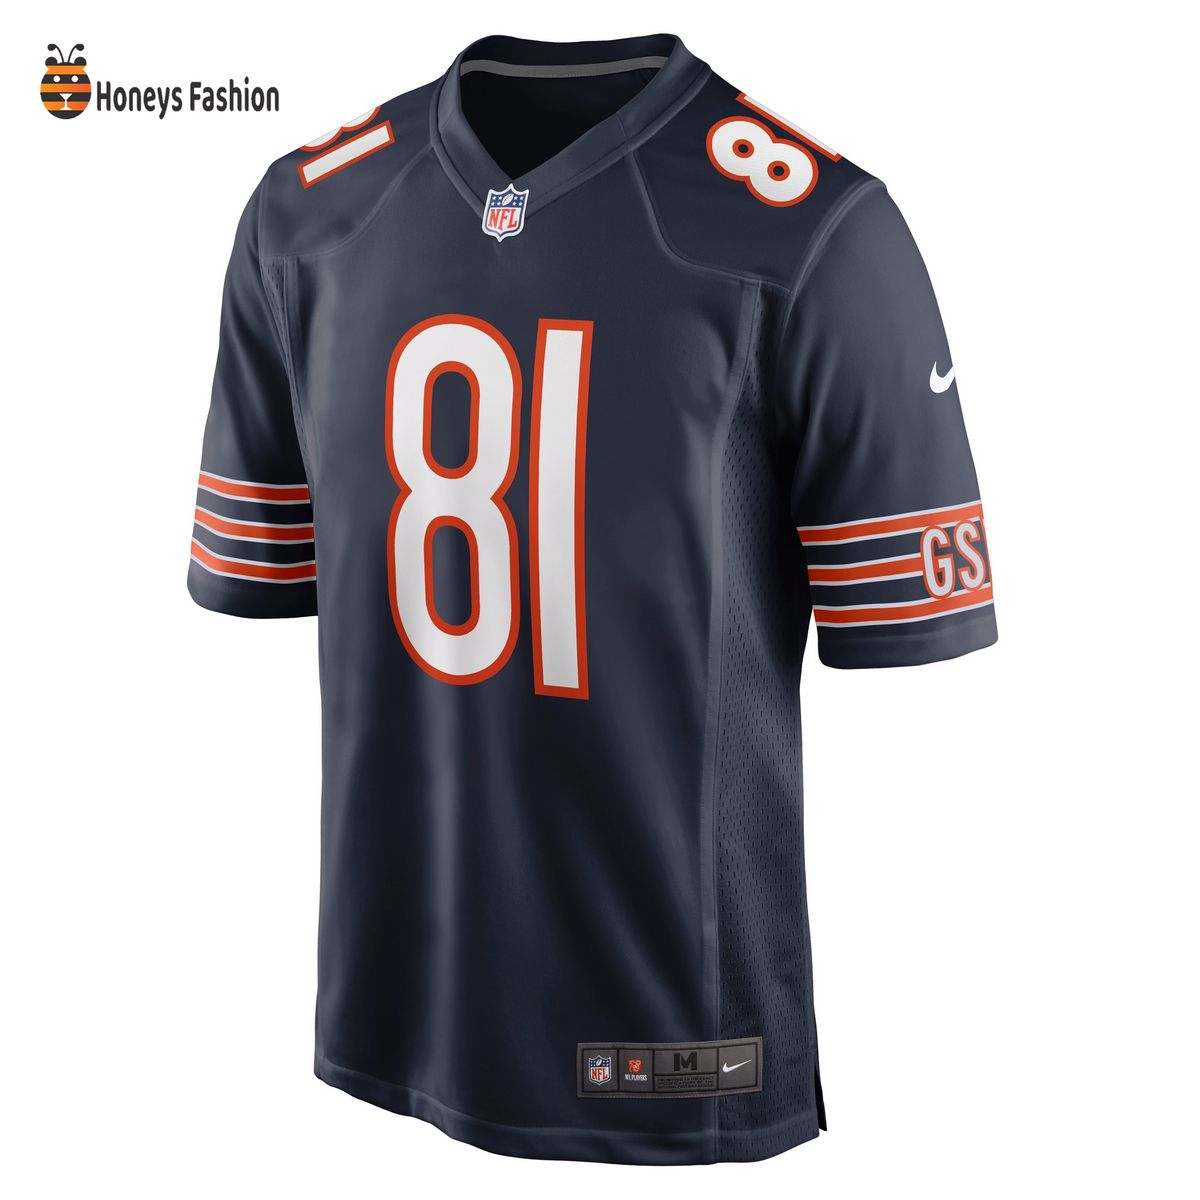 J.P. Holtz Chicago Bears Nike Game Navy Jersey